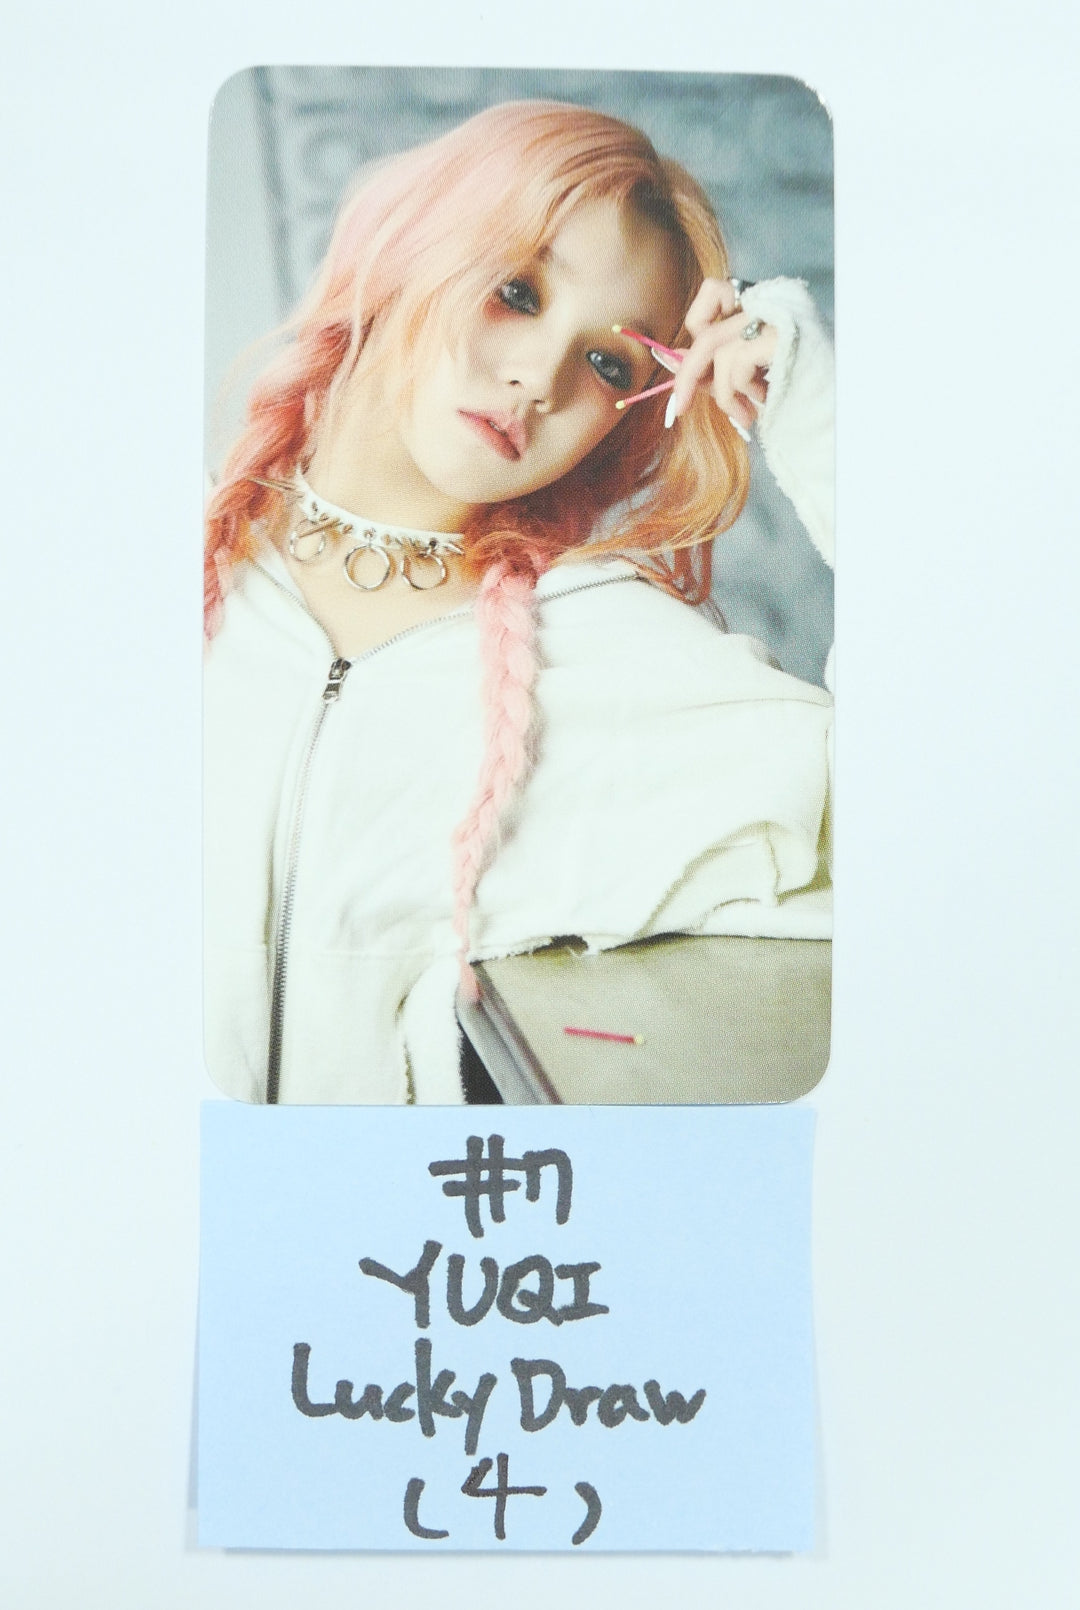 (g) I-DLE "I NEVER DIE" - AppleMusic Luckydraw Event Photocard